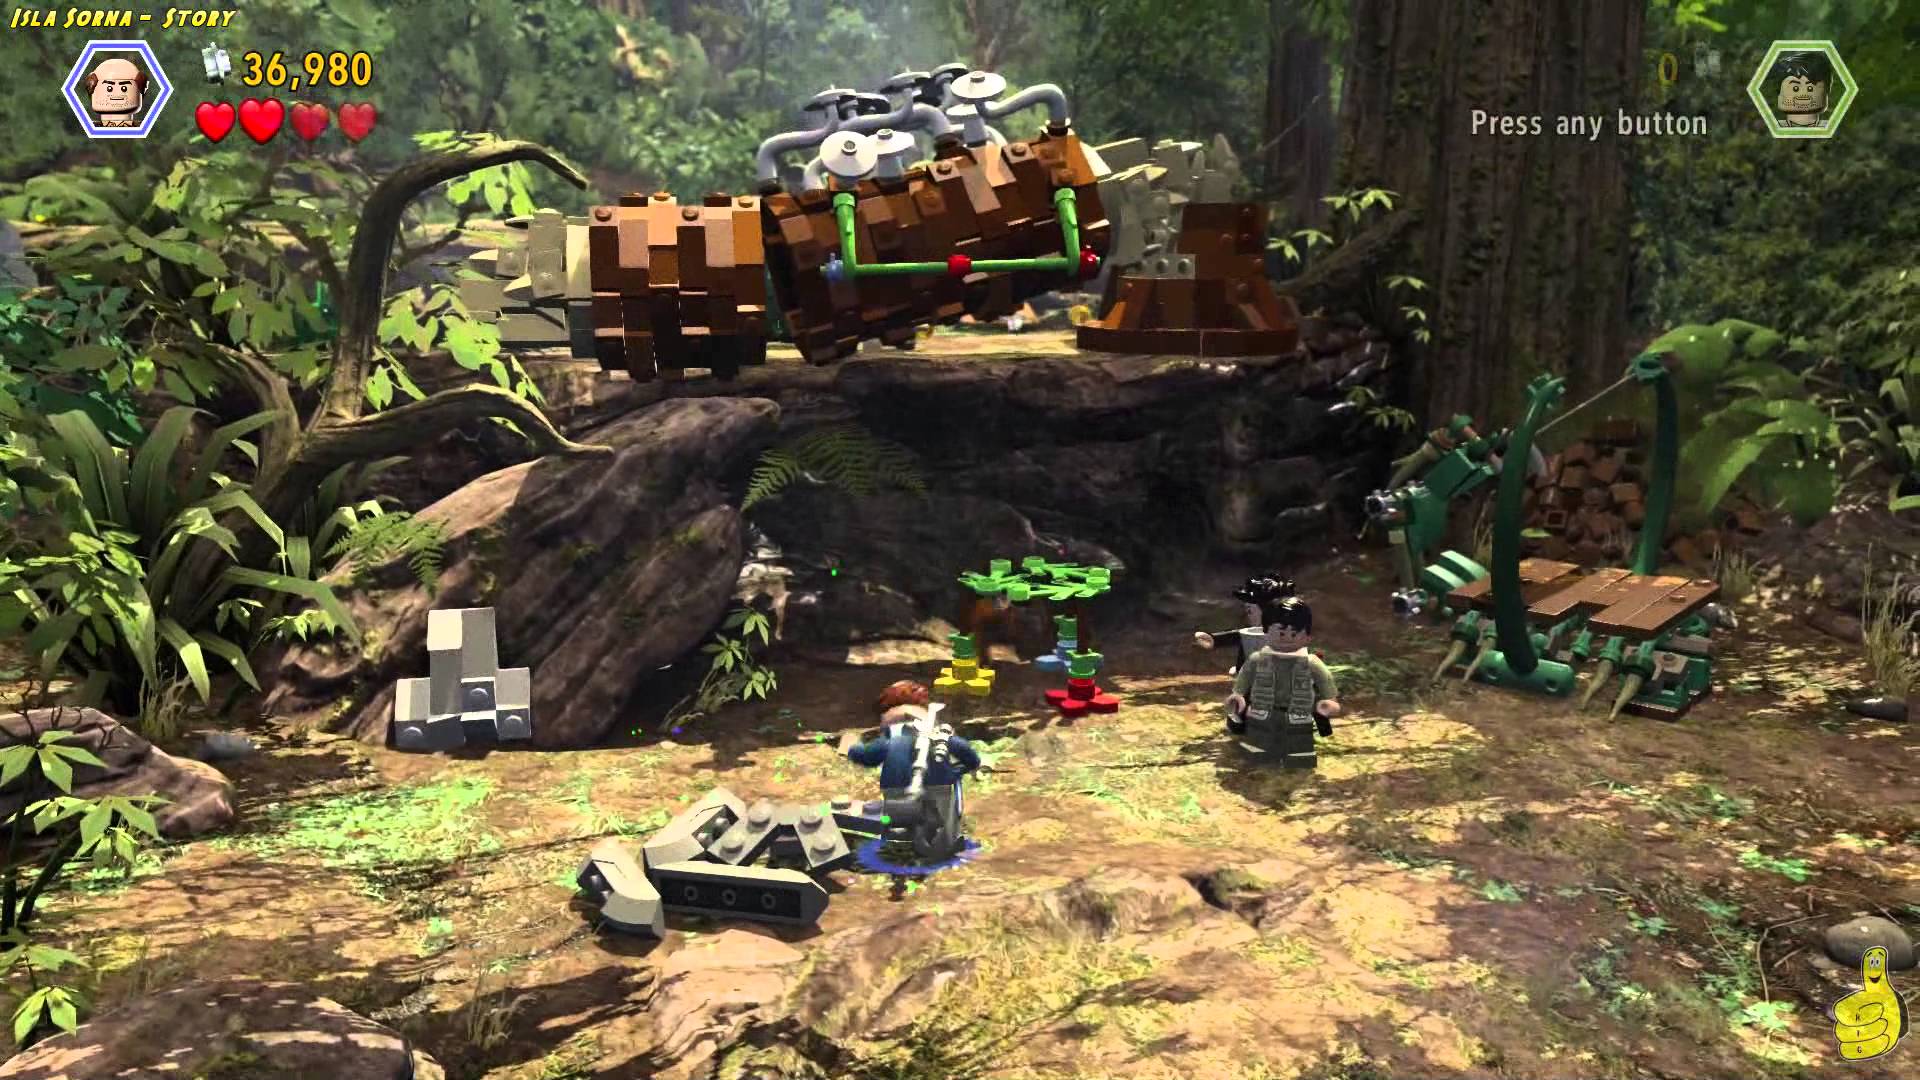 Lego Jurassic World: Level 6 STORY That’s How It All Starts Trophy/Achievement – HTG